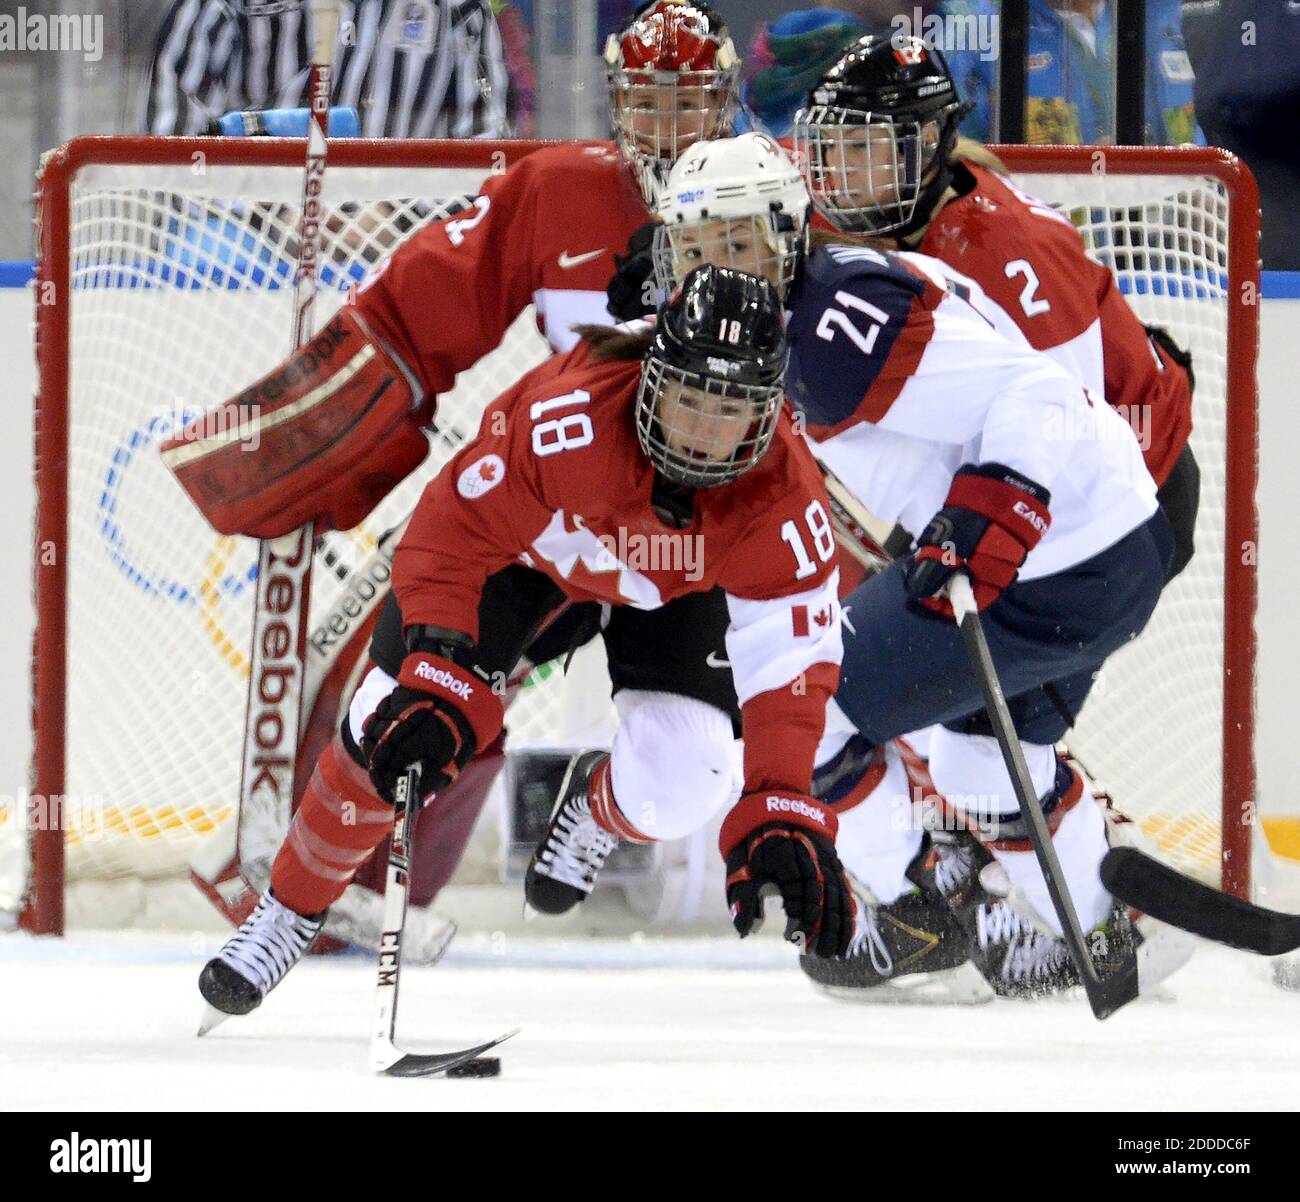 NO FILM, NO VIDEO, NO TV, NO DOCUMENTARY - Canada's Catherine Ward chases the loose puck in front of USA's Hilary Knight in front of Canada's goal in the first period of a women's hockey game at the Winter Olympics in Sochi, Russia, Wednesday, Feb. 12, 2014. Canada beat USA, 3-2. Photo by Mark Reis/Colorado Springs Gazette/MCT/ABACAPRESS.COM Stock Photo